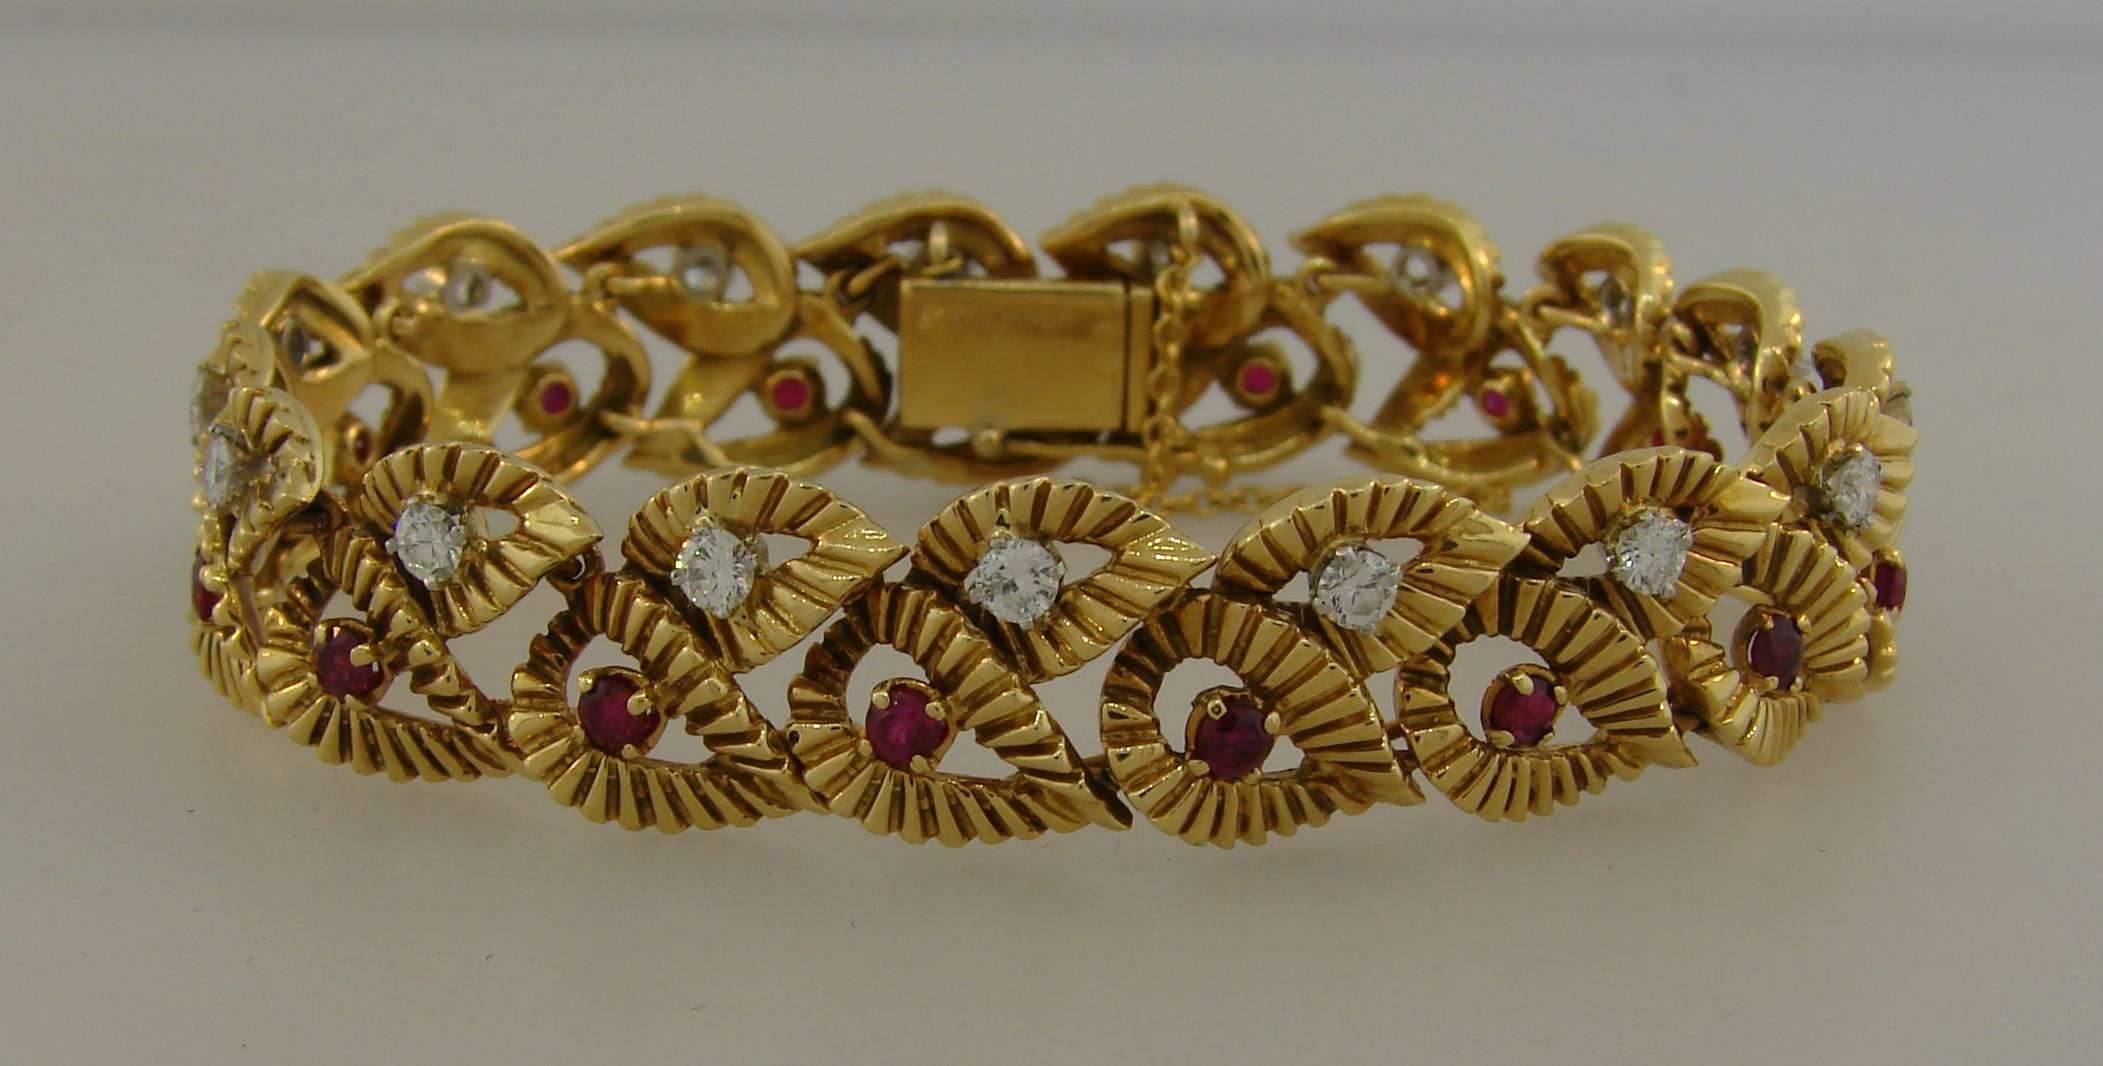 Delicate feminine bracelet created by French Jewelry Maison Boucheron in the 1950s. Wearable and elegant, it is a great addition to your jewelry collection. 
It is made of 18 karat yellow gold and sprinkled with round rubies (total weight